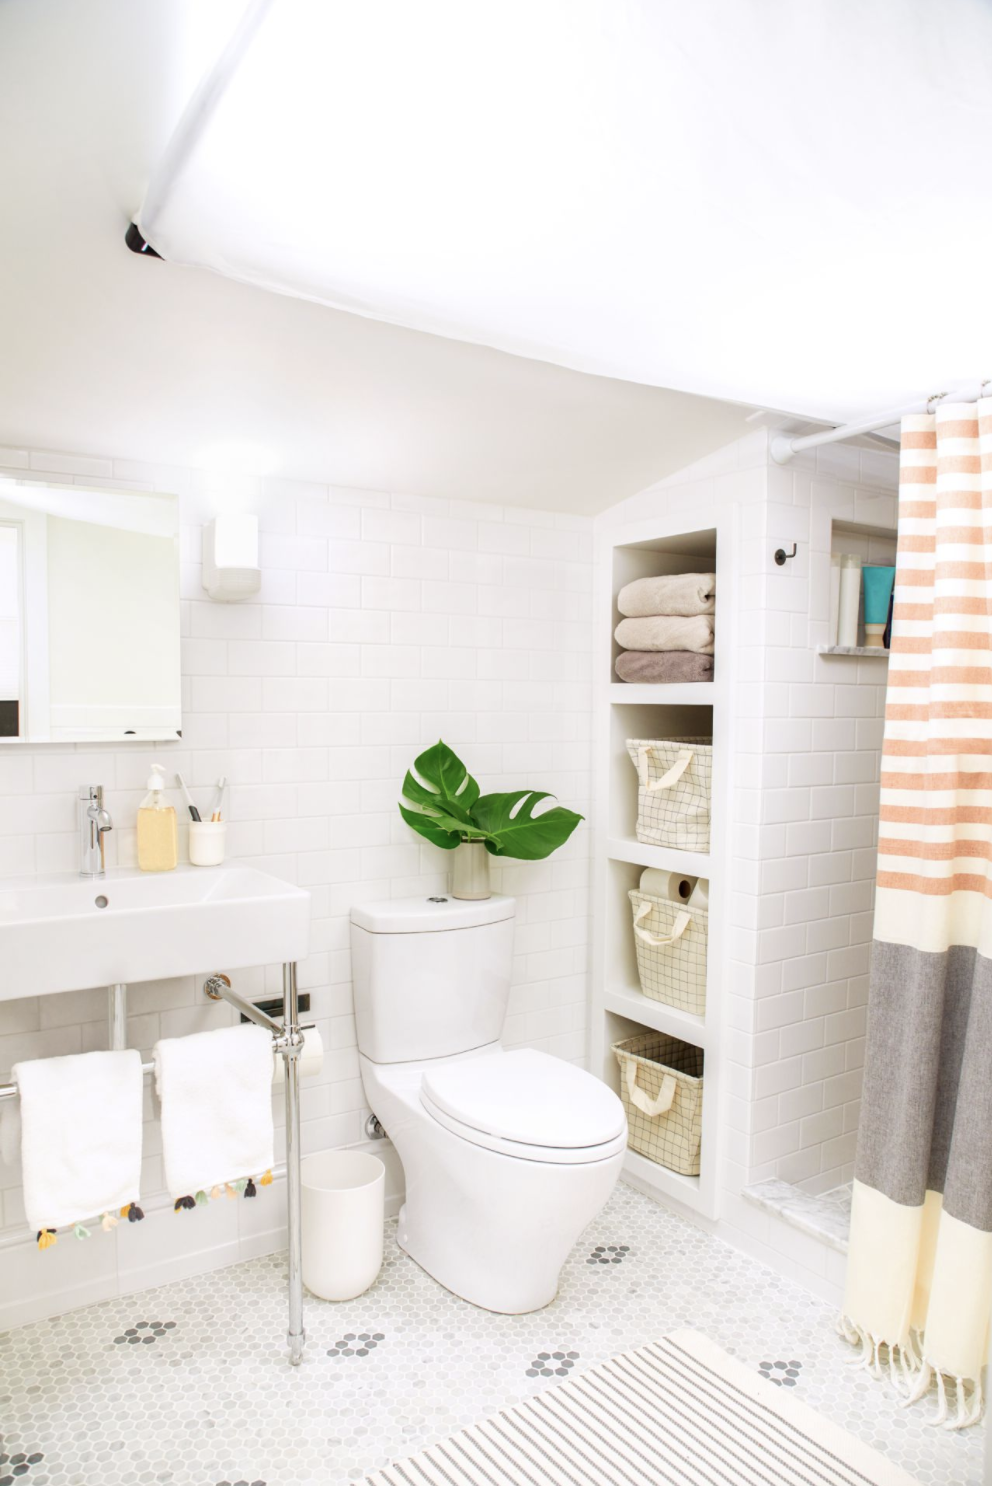 Guest Bathroom Must-Haves